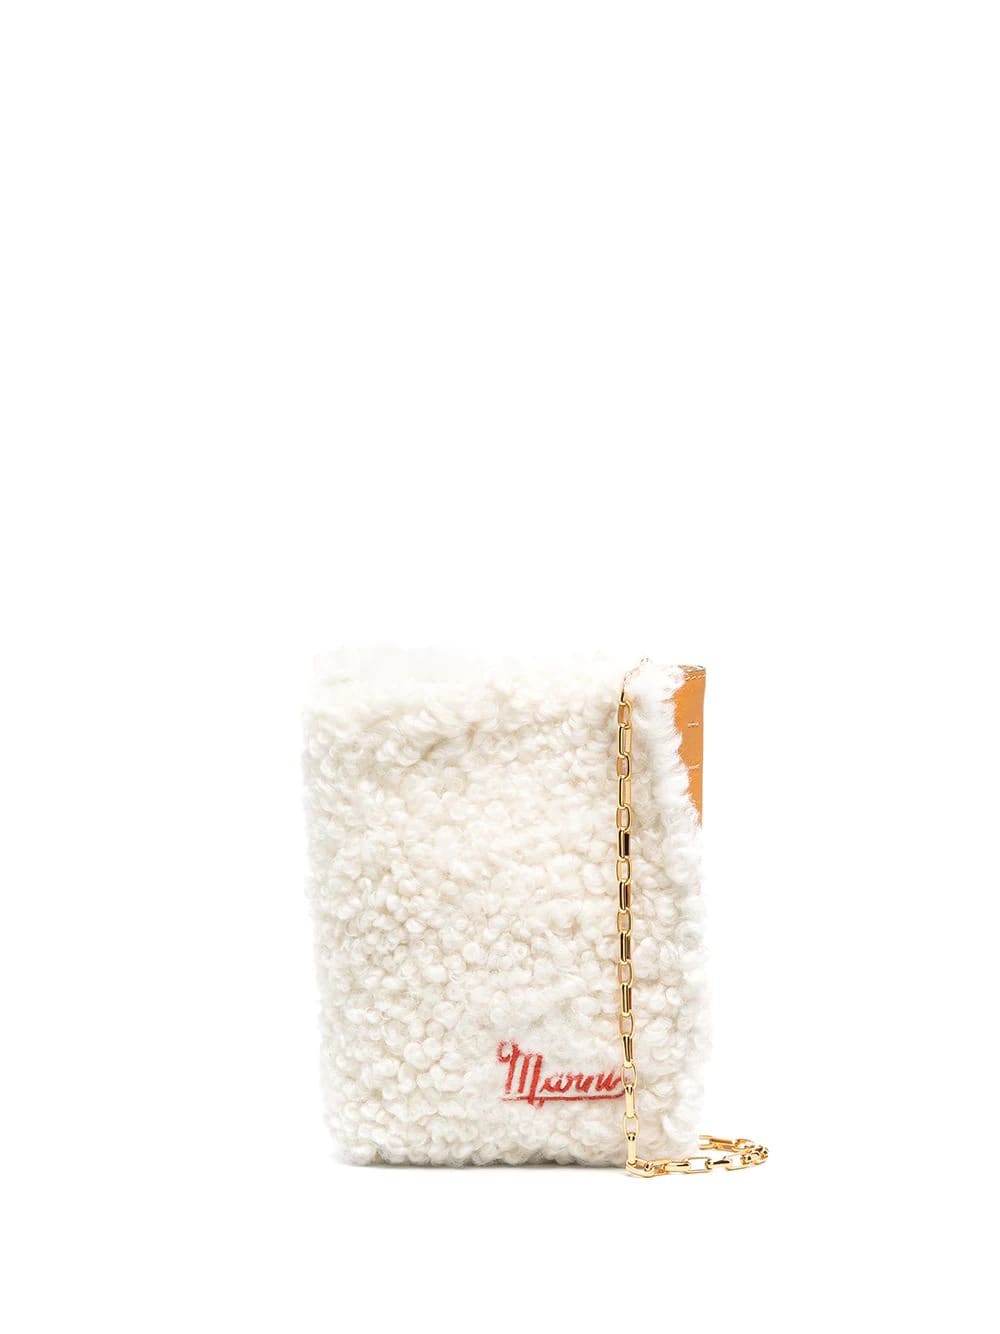 Marni White And Light Orange Mini Bag In Shearling And Leather With Golden Chain